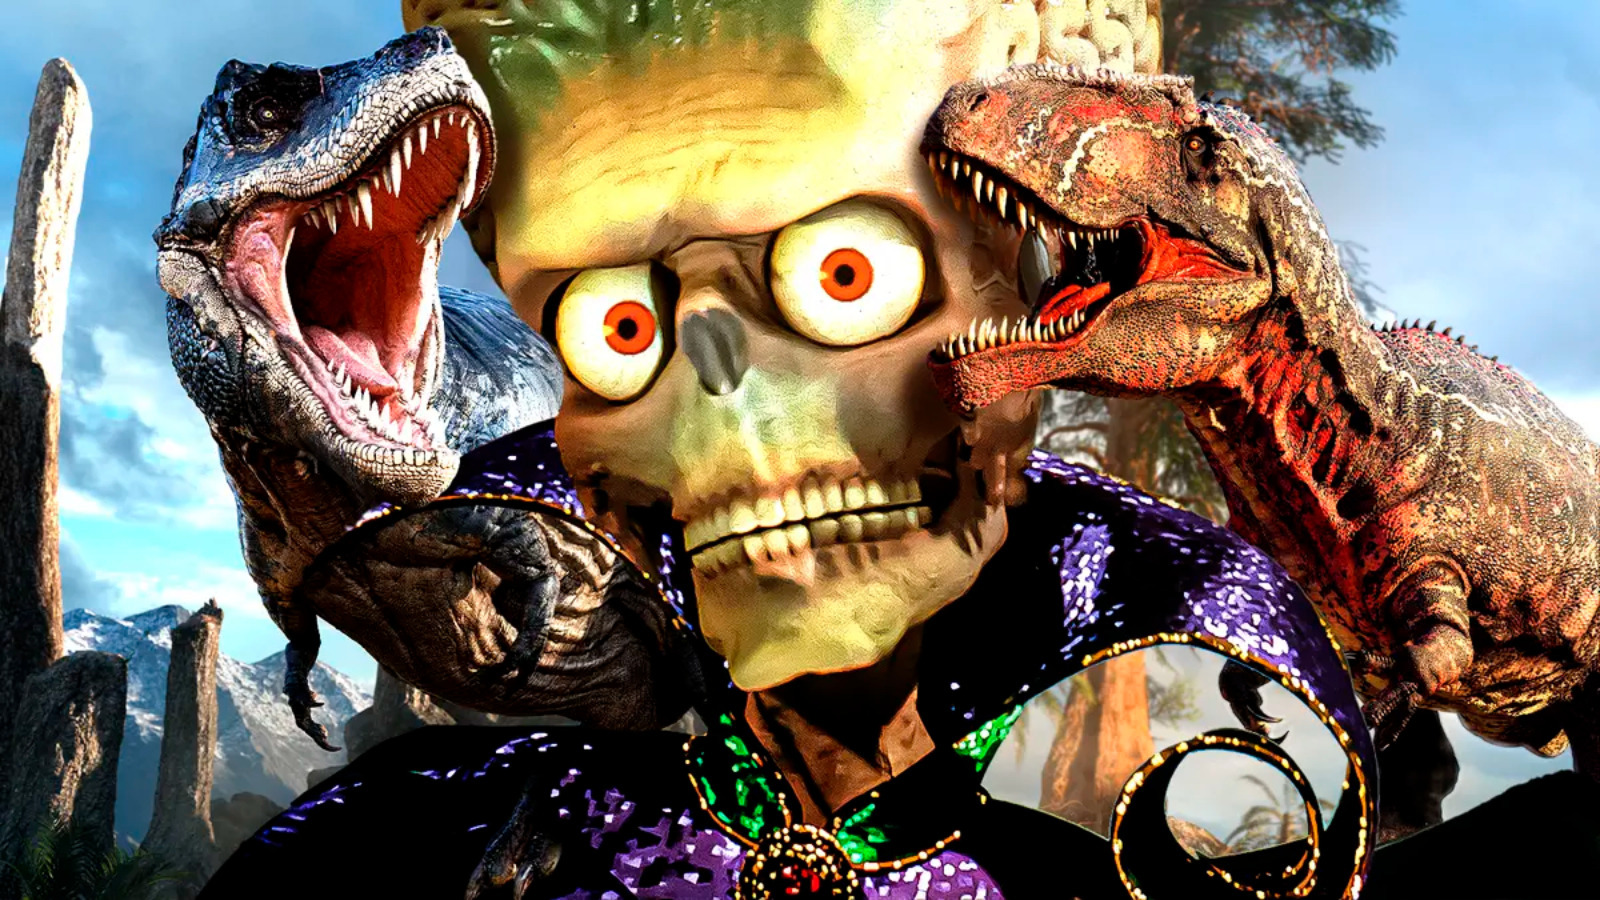 Mars Attacks Was Originally About A Dinosaur Attack (But The Lost World Changed That) – /Film